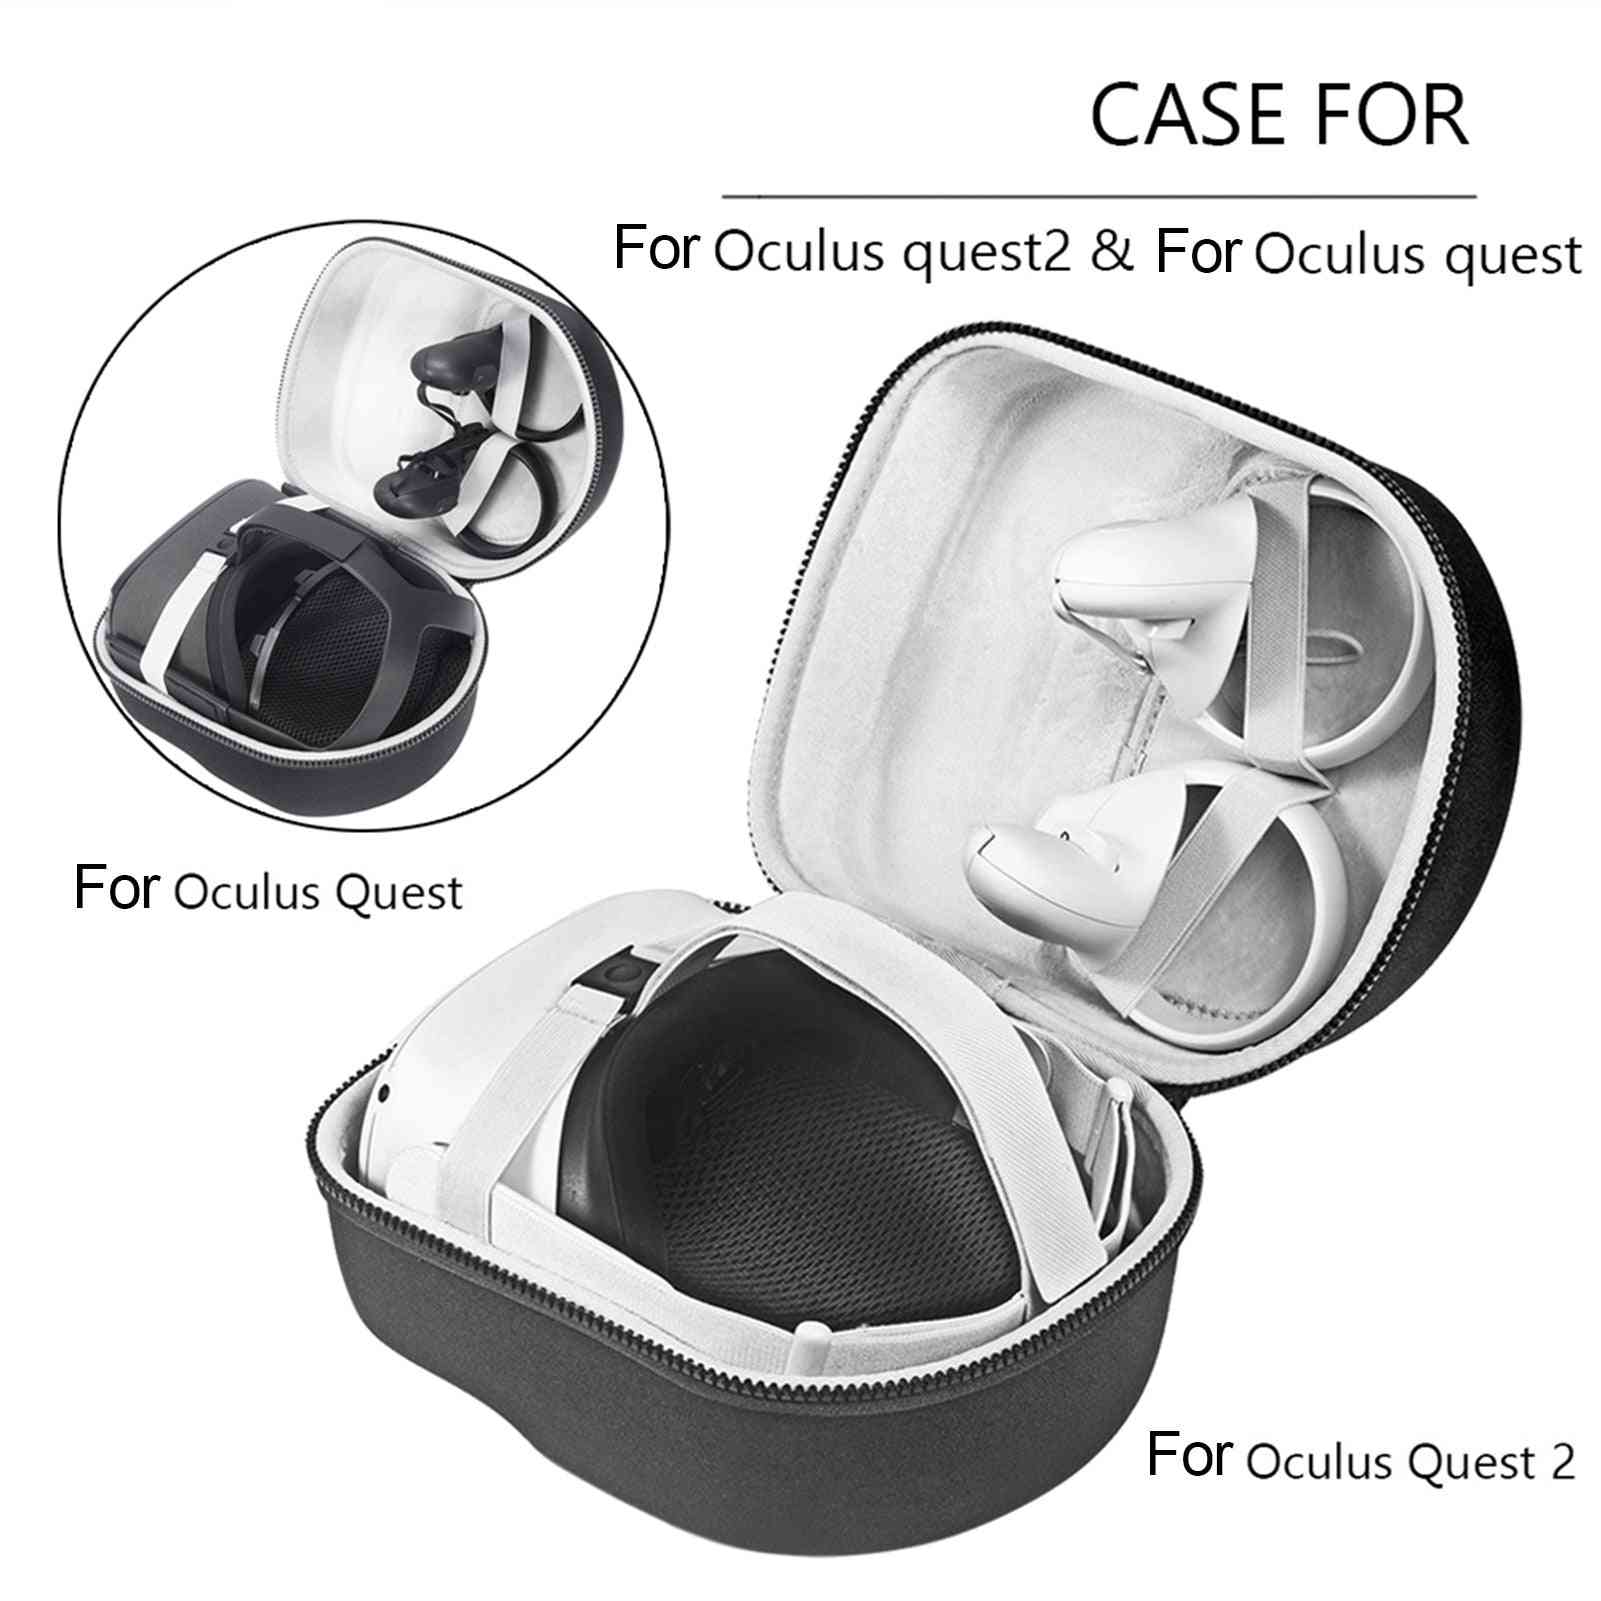 Portable- Glasses Travel Storage Case, Carrying Bag